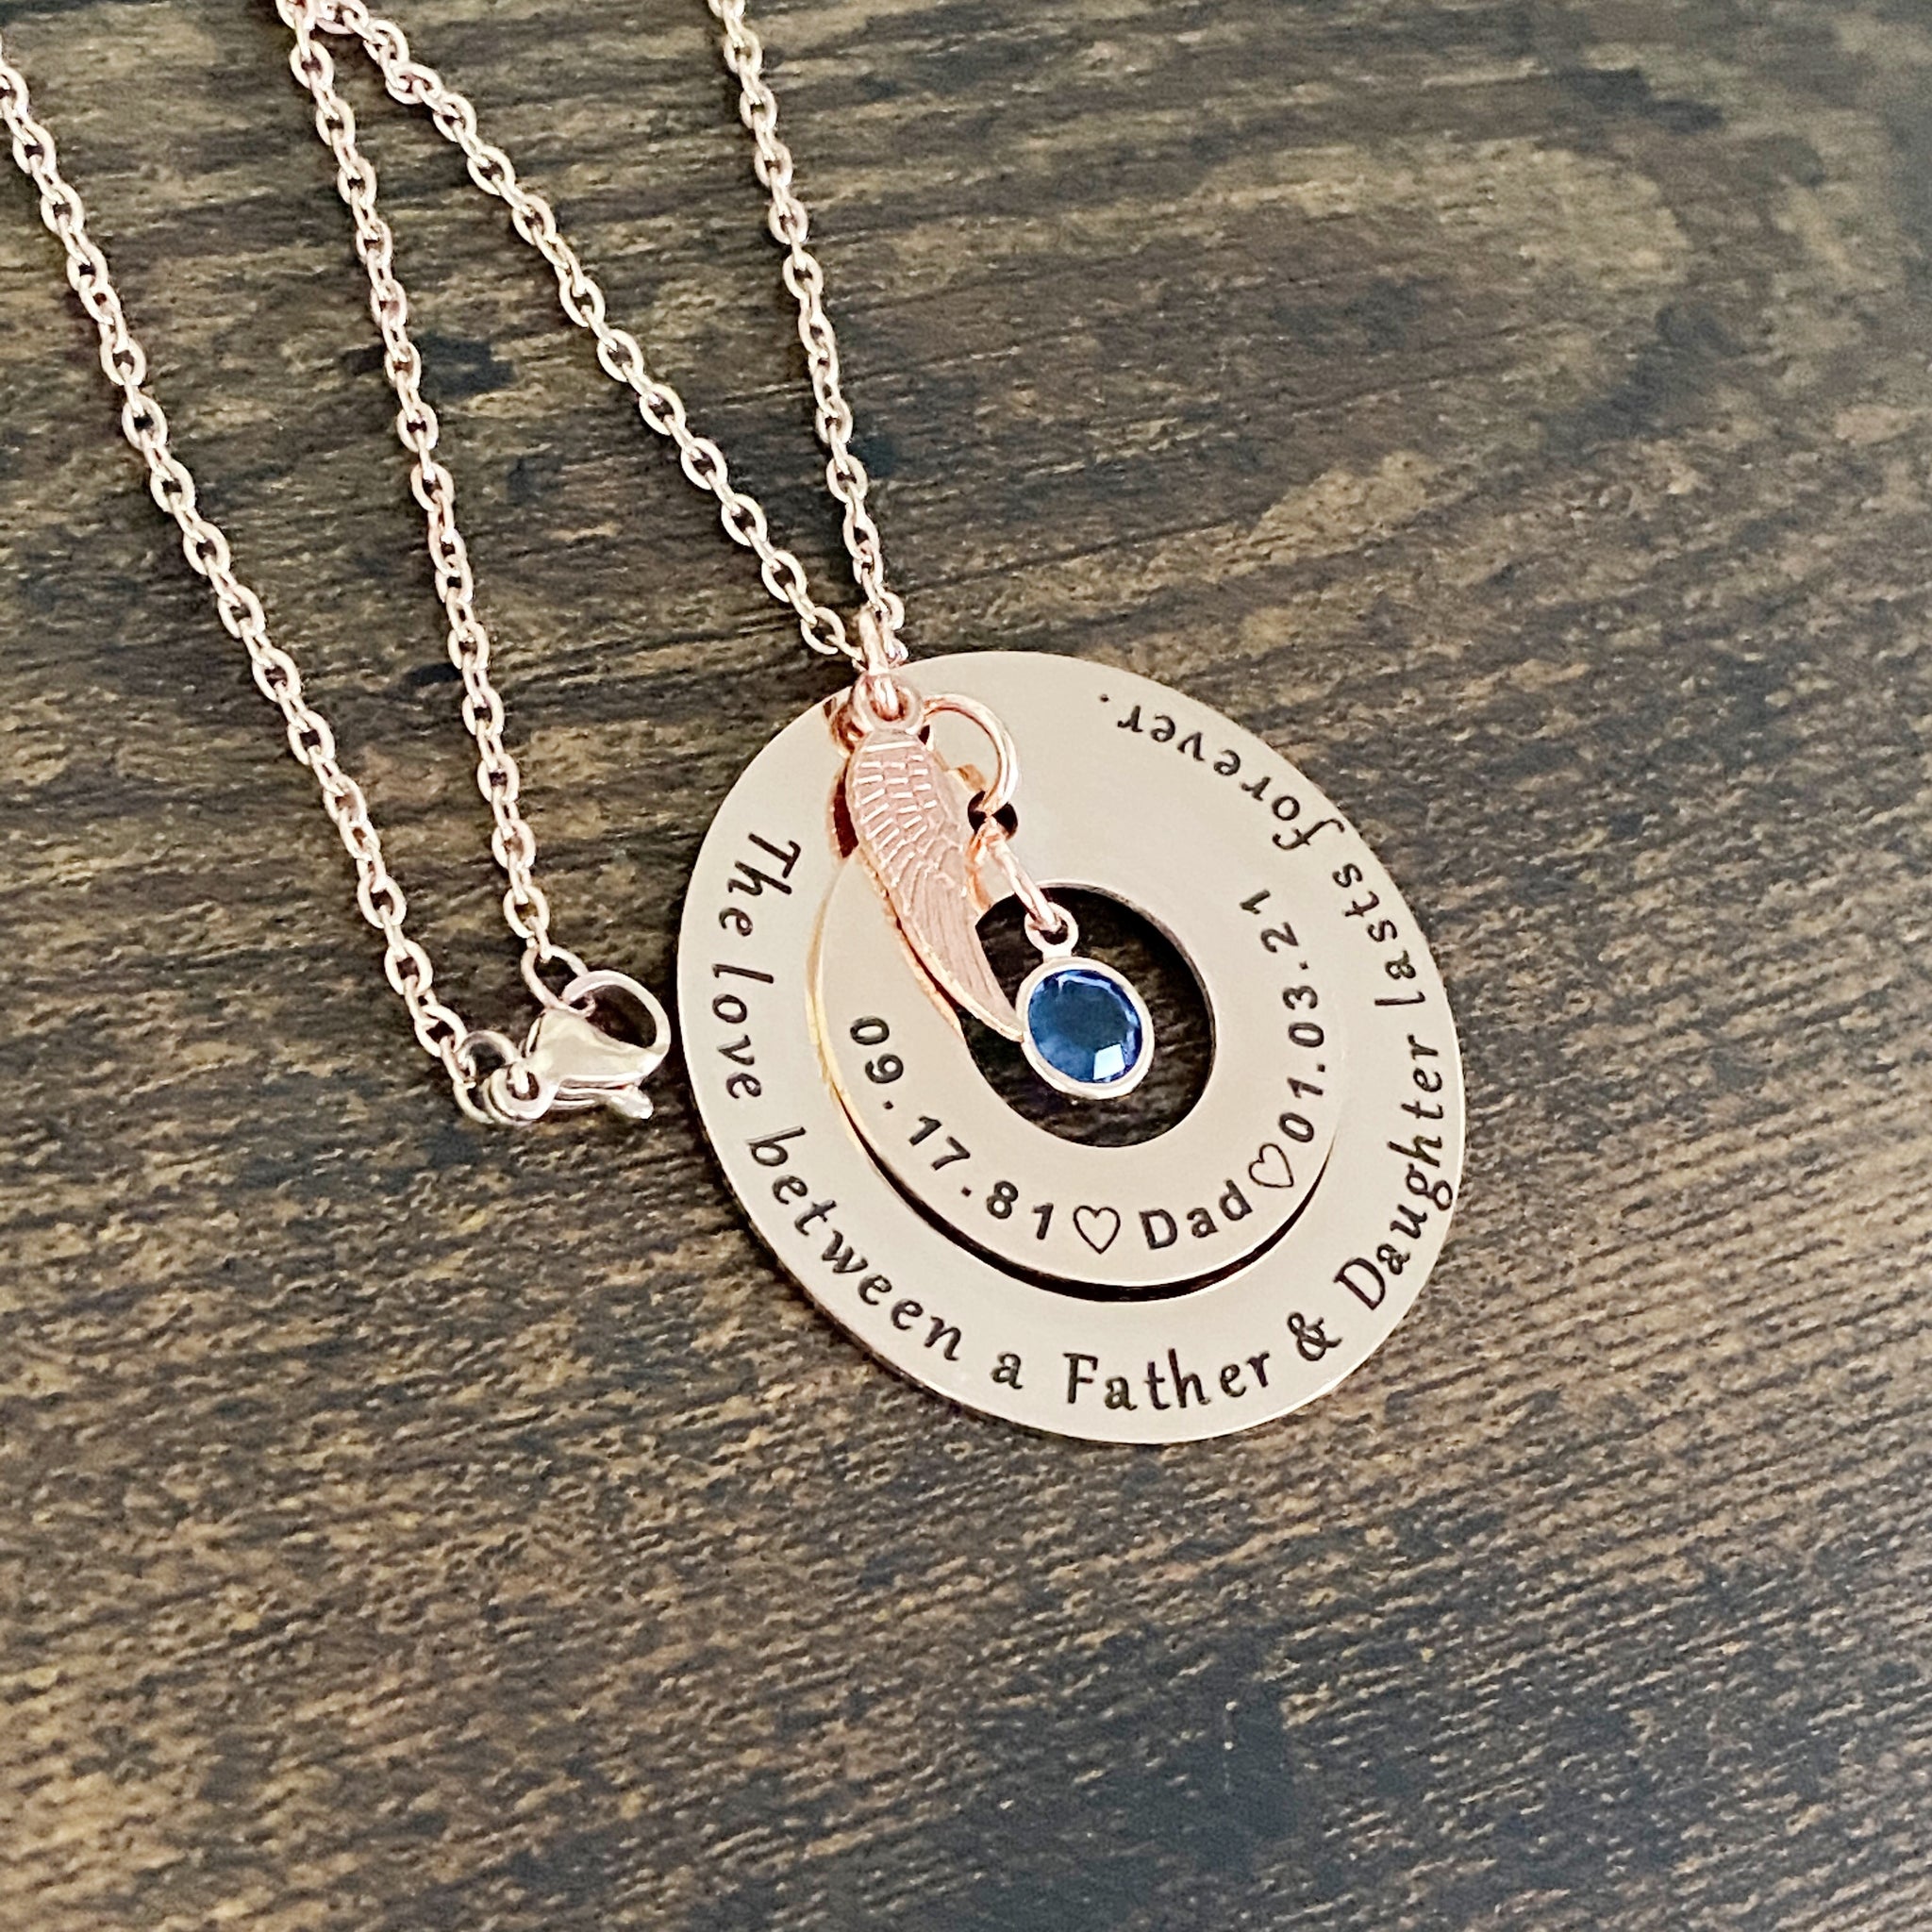 Personalized Memorial Necklaces | Centime Gift